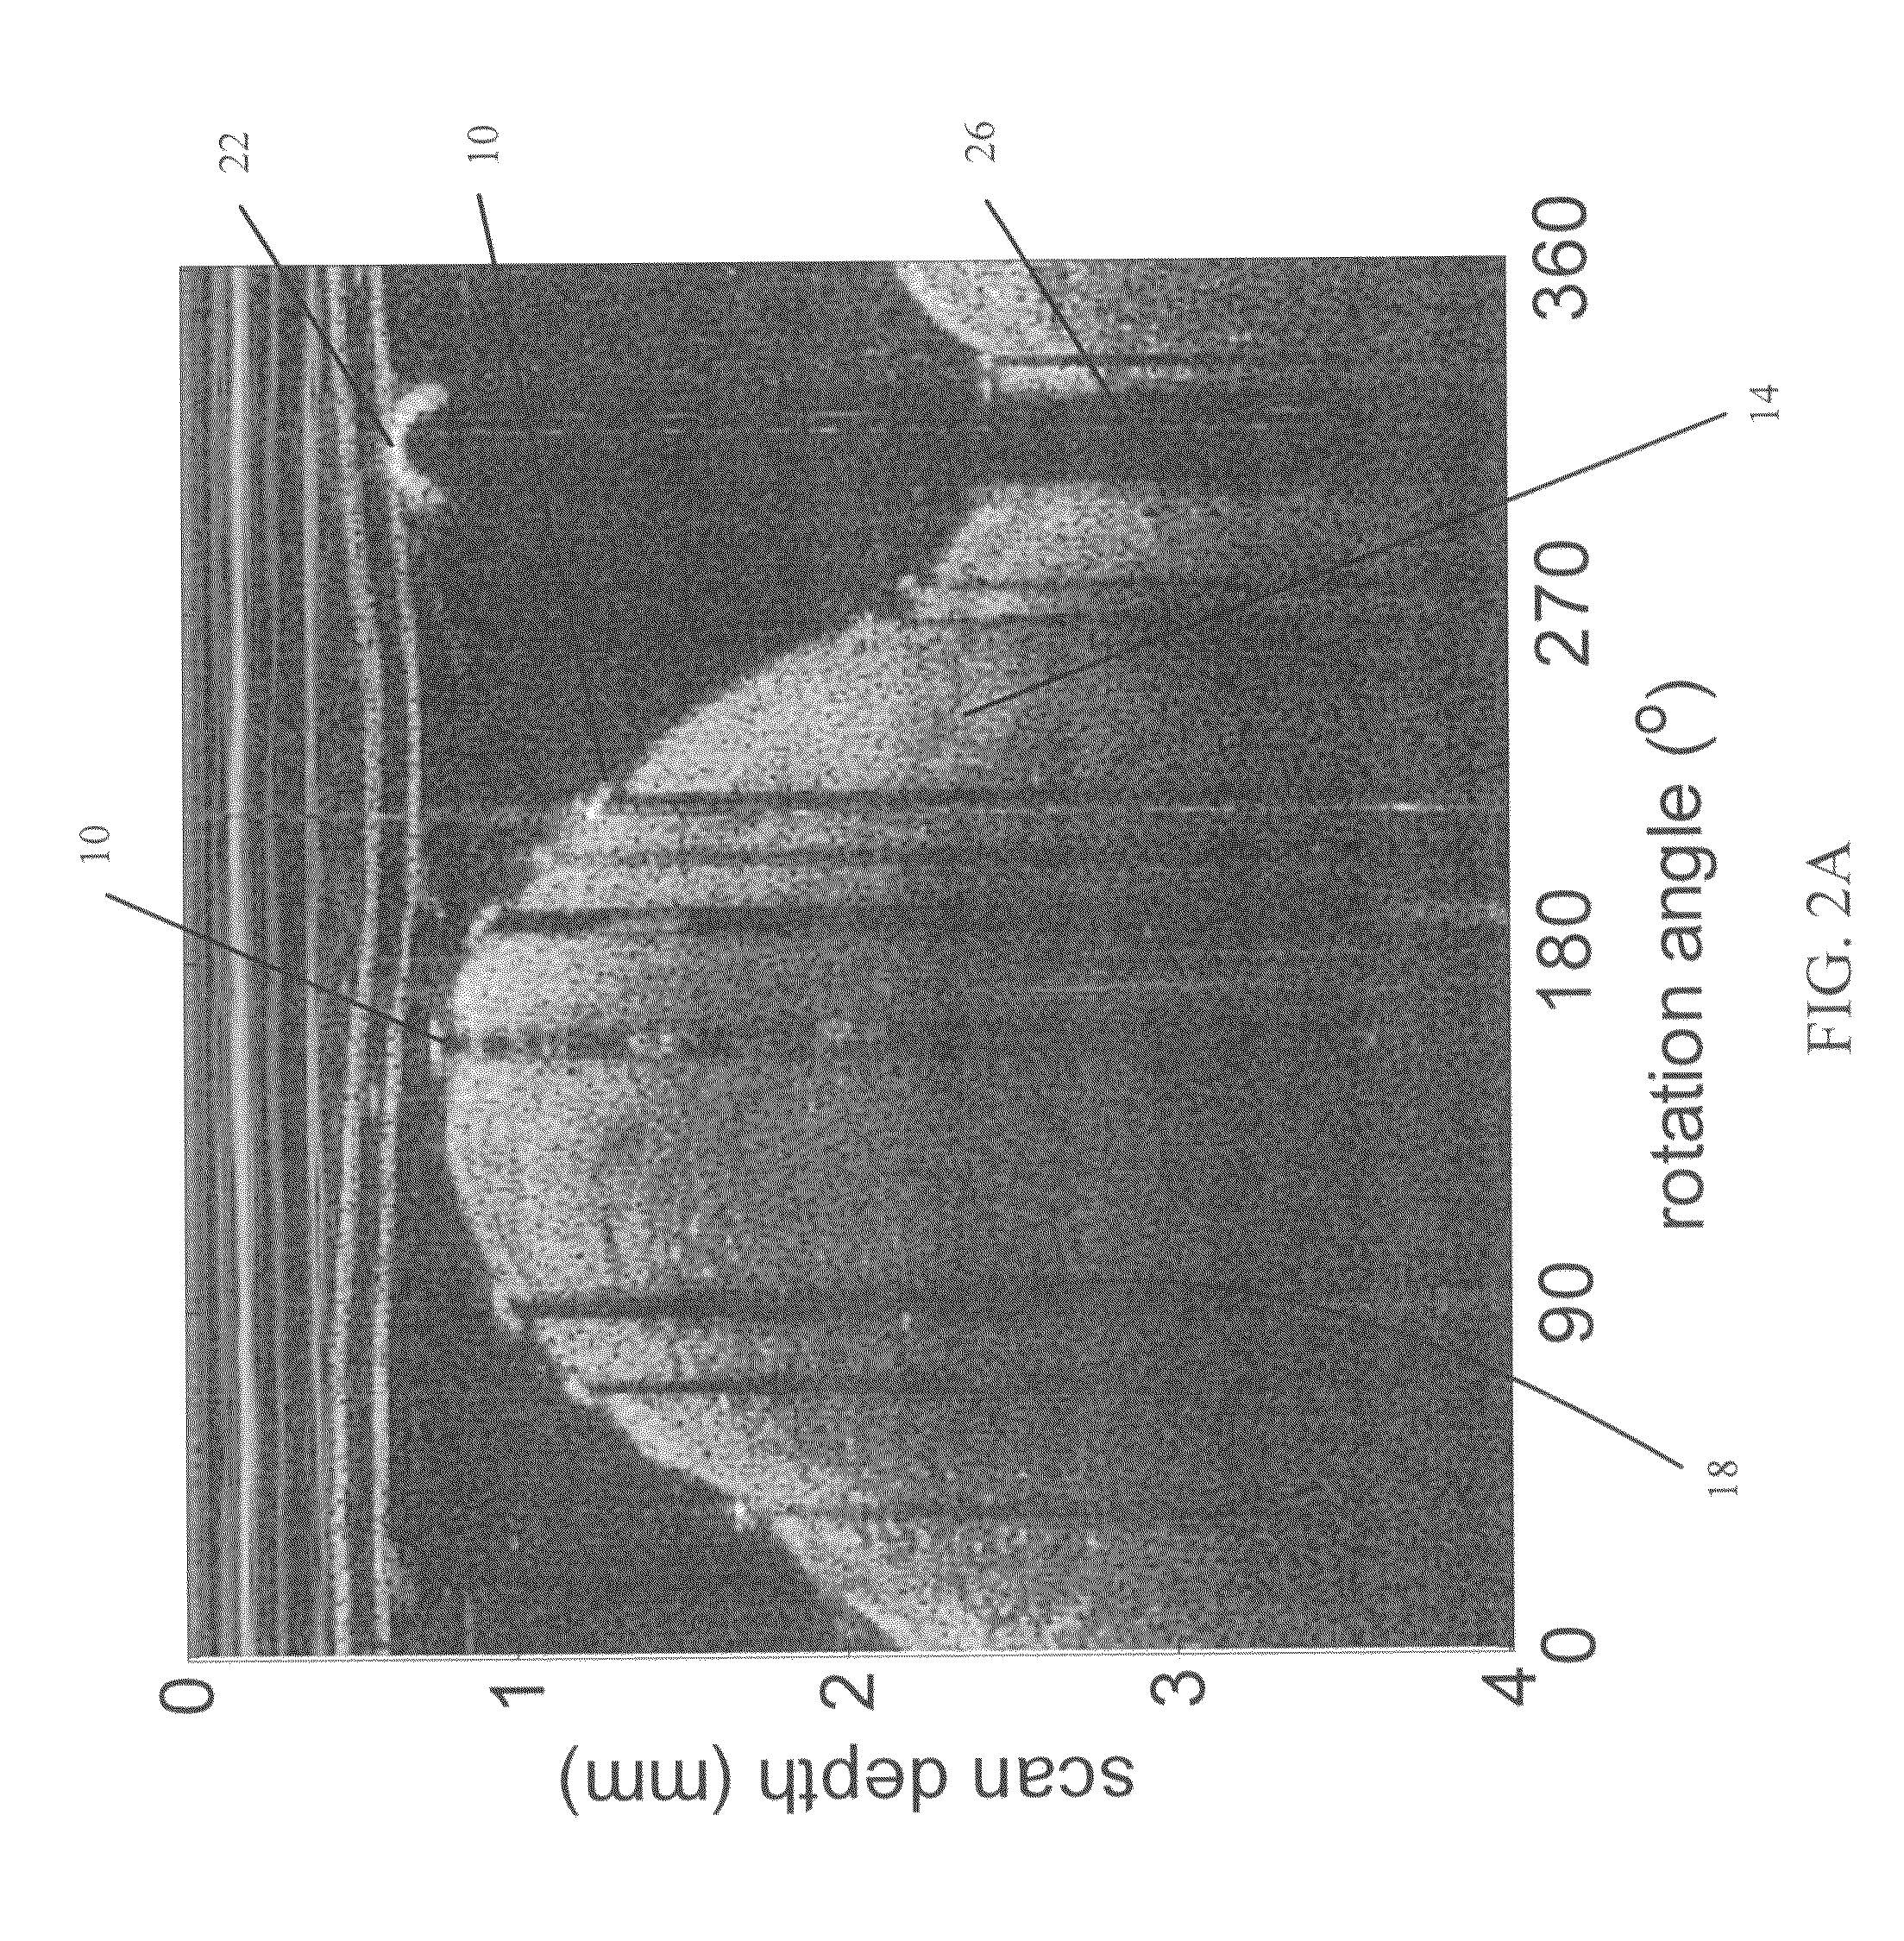 Methods for stent strut detection and related measurement and display using optical coherence tomography